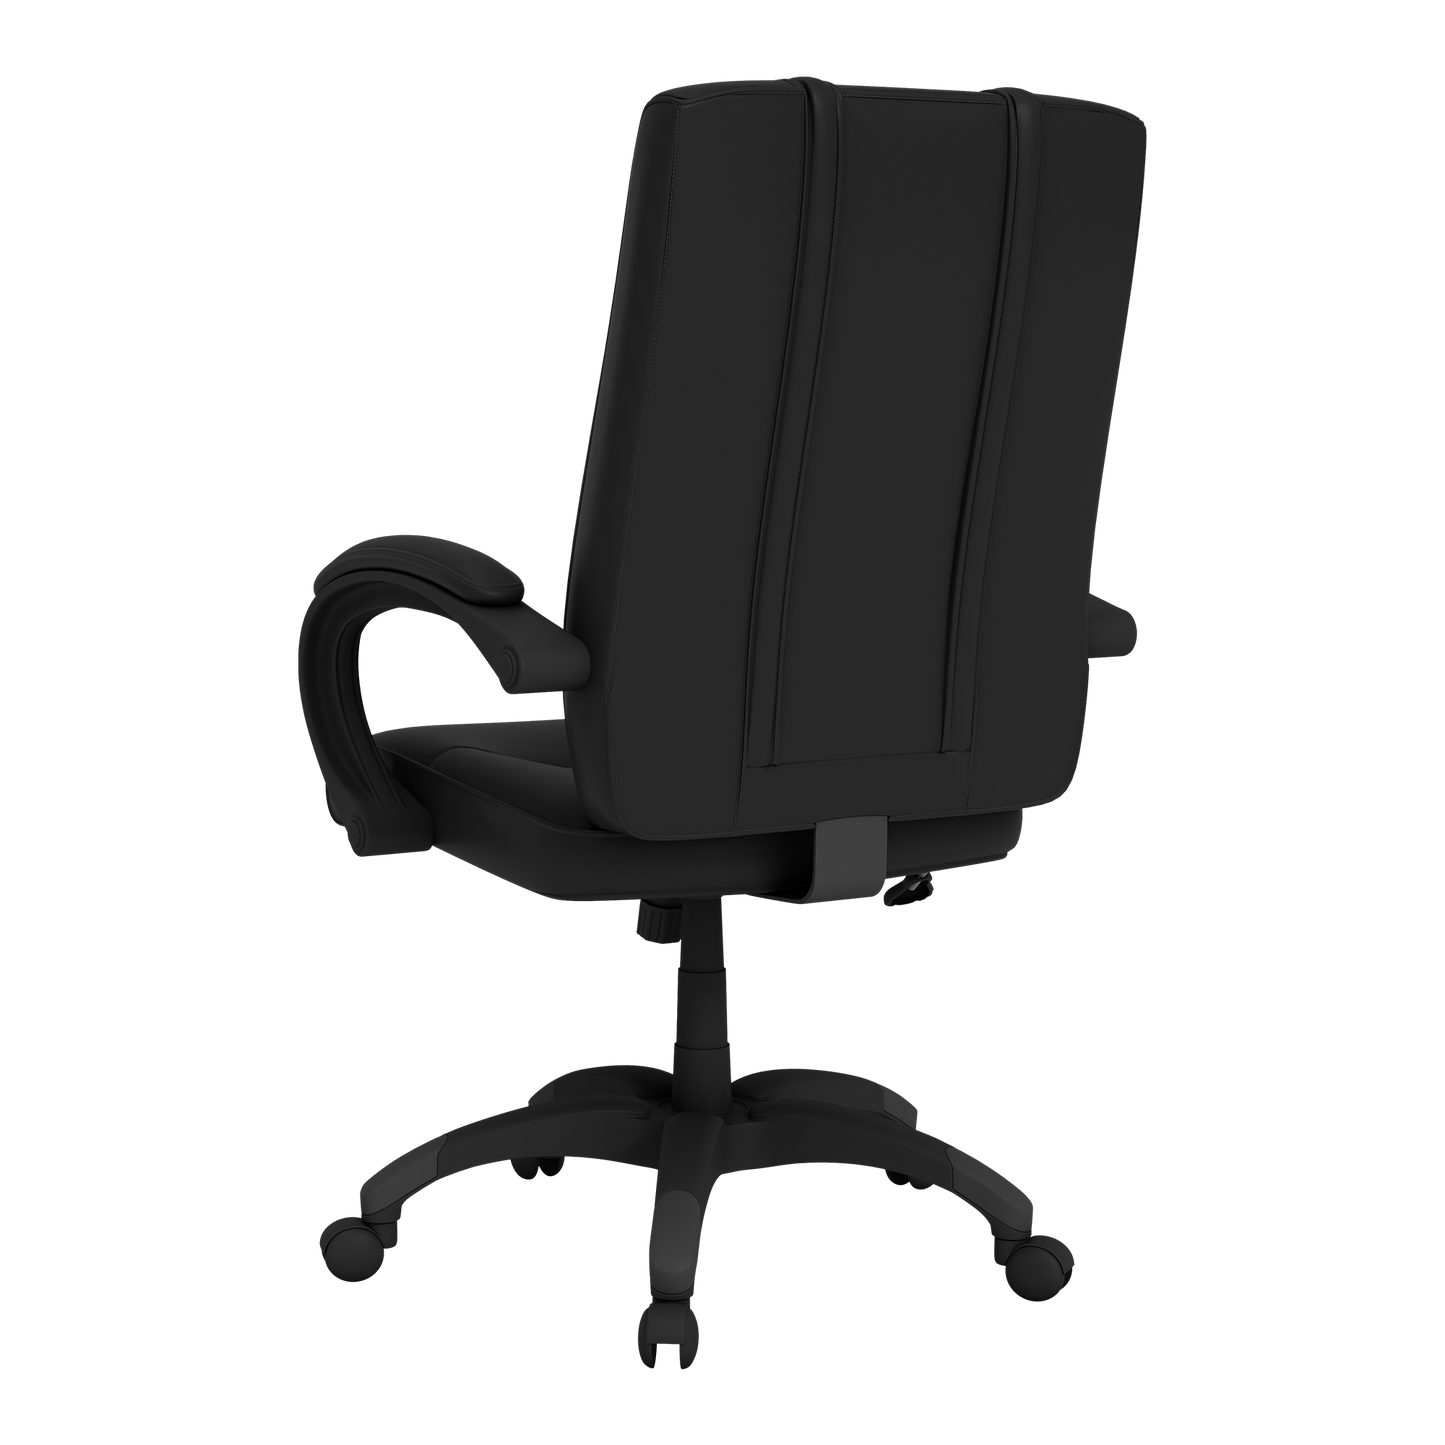 Office Chair 1000 with  New Orleans Saints Helmet Logo